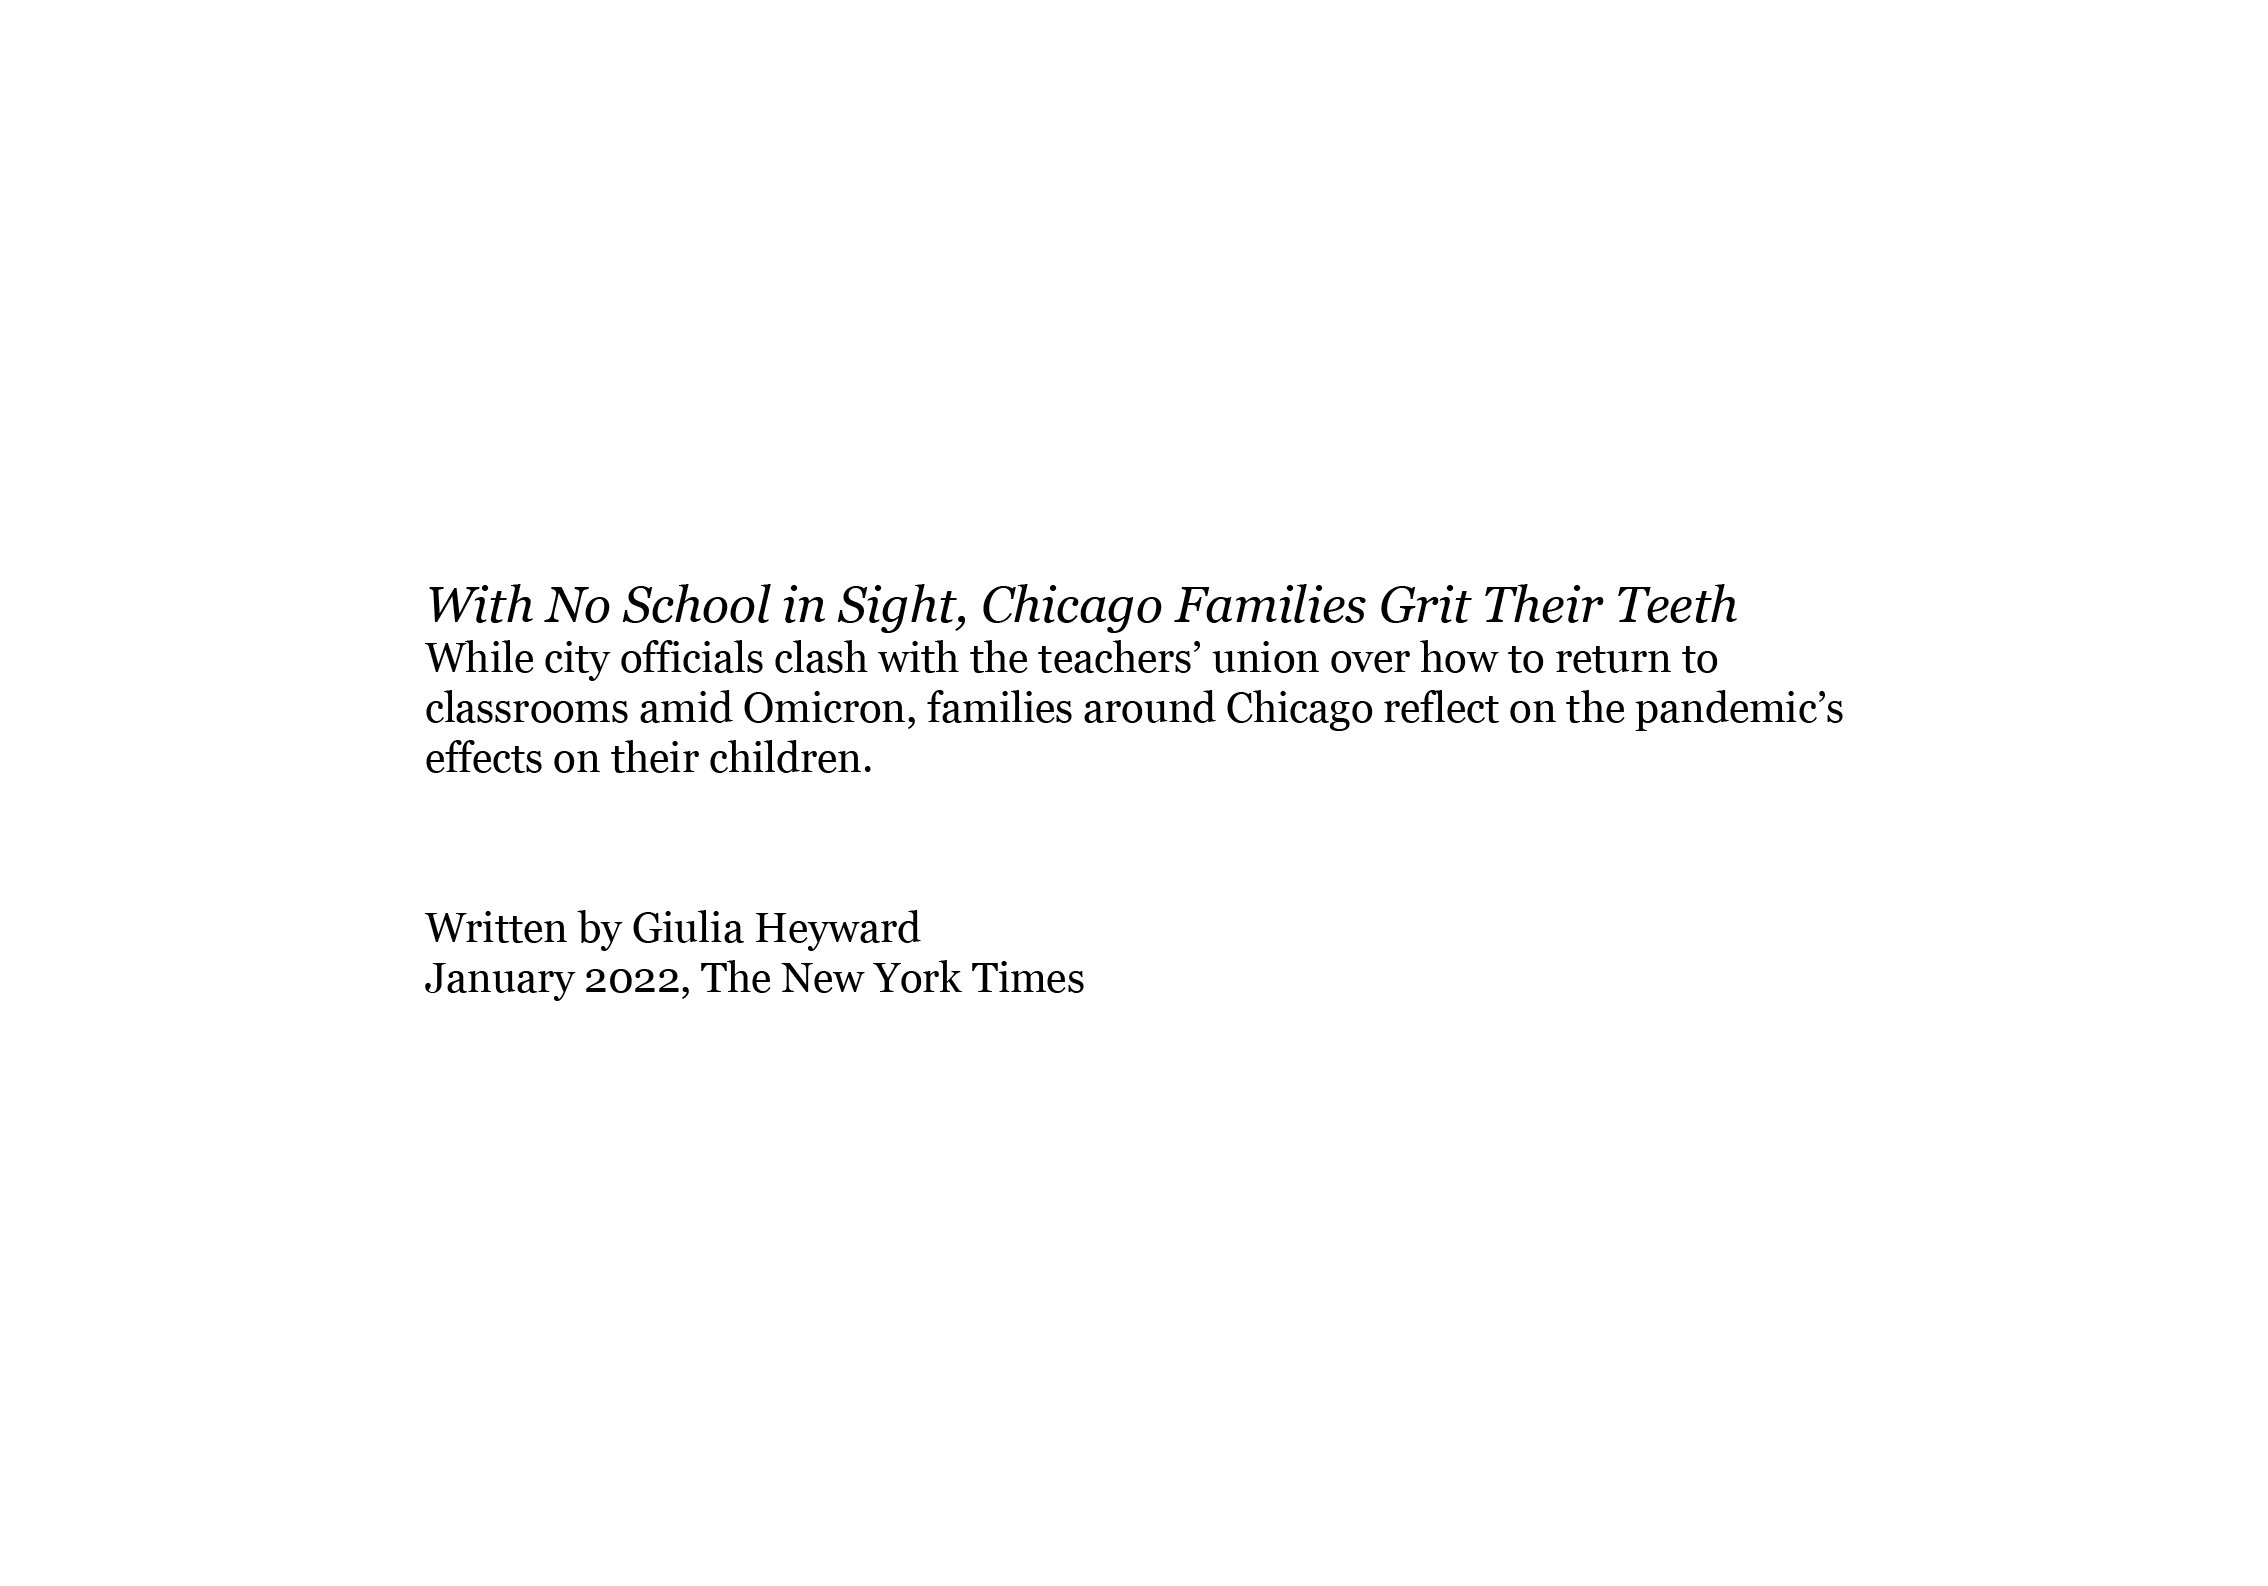  Chicago Families Deal with the Uncertainty of School Returning  The New York Times, 2022  